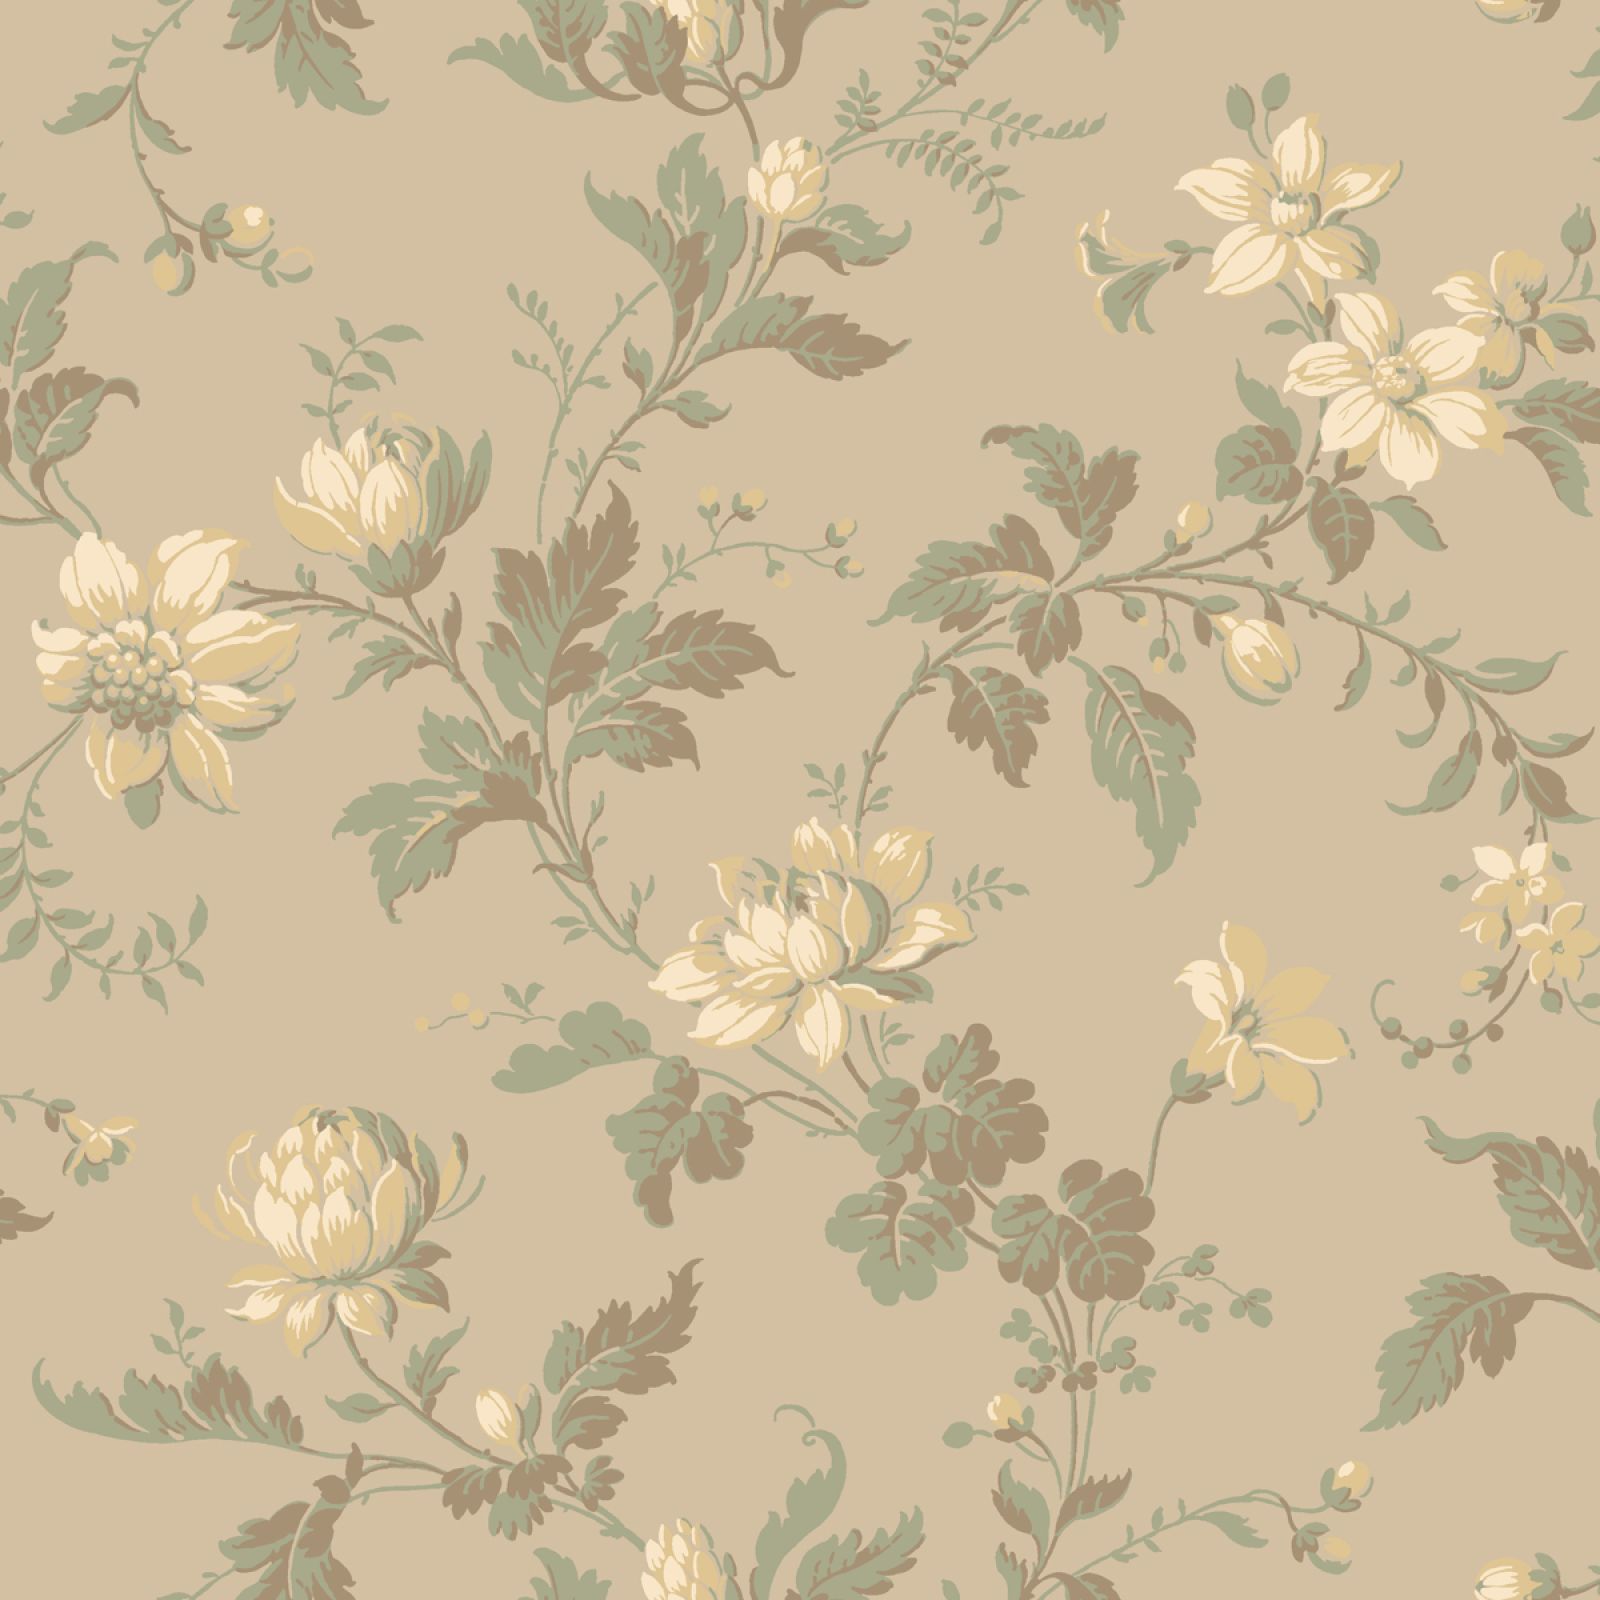 Blooms and leaves wallpaper in a choice of four colourways